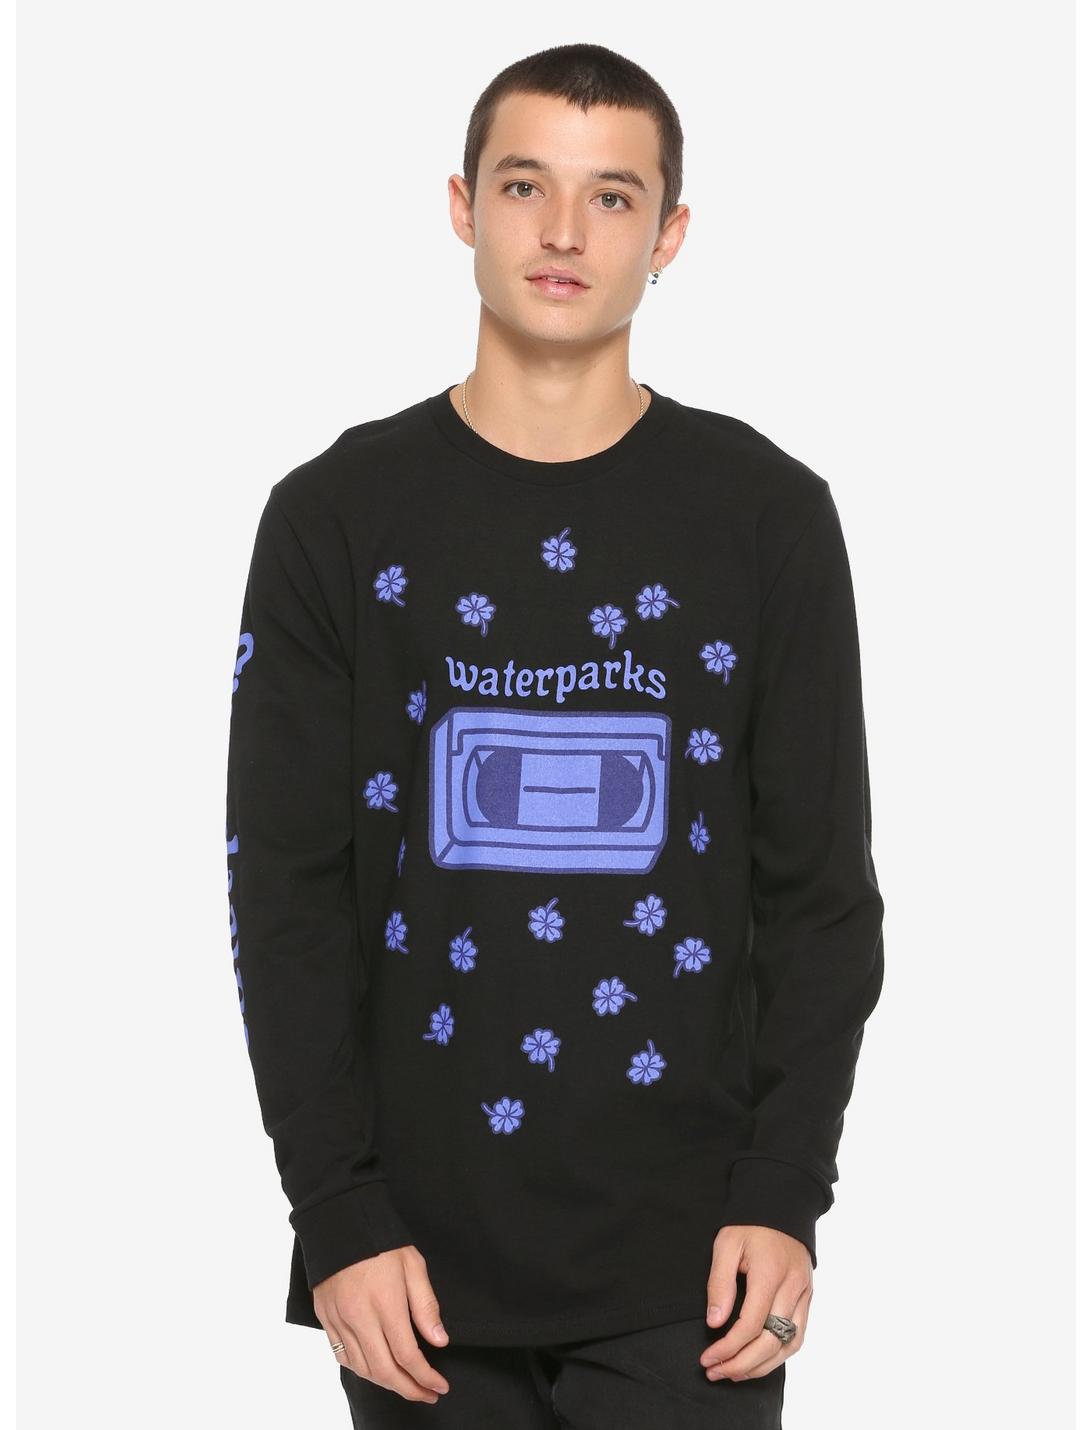 Waterparks Waterparks Clover VHS Long-Sleeve T-Shirt, BLACK, hi-res